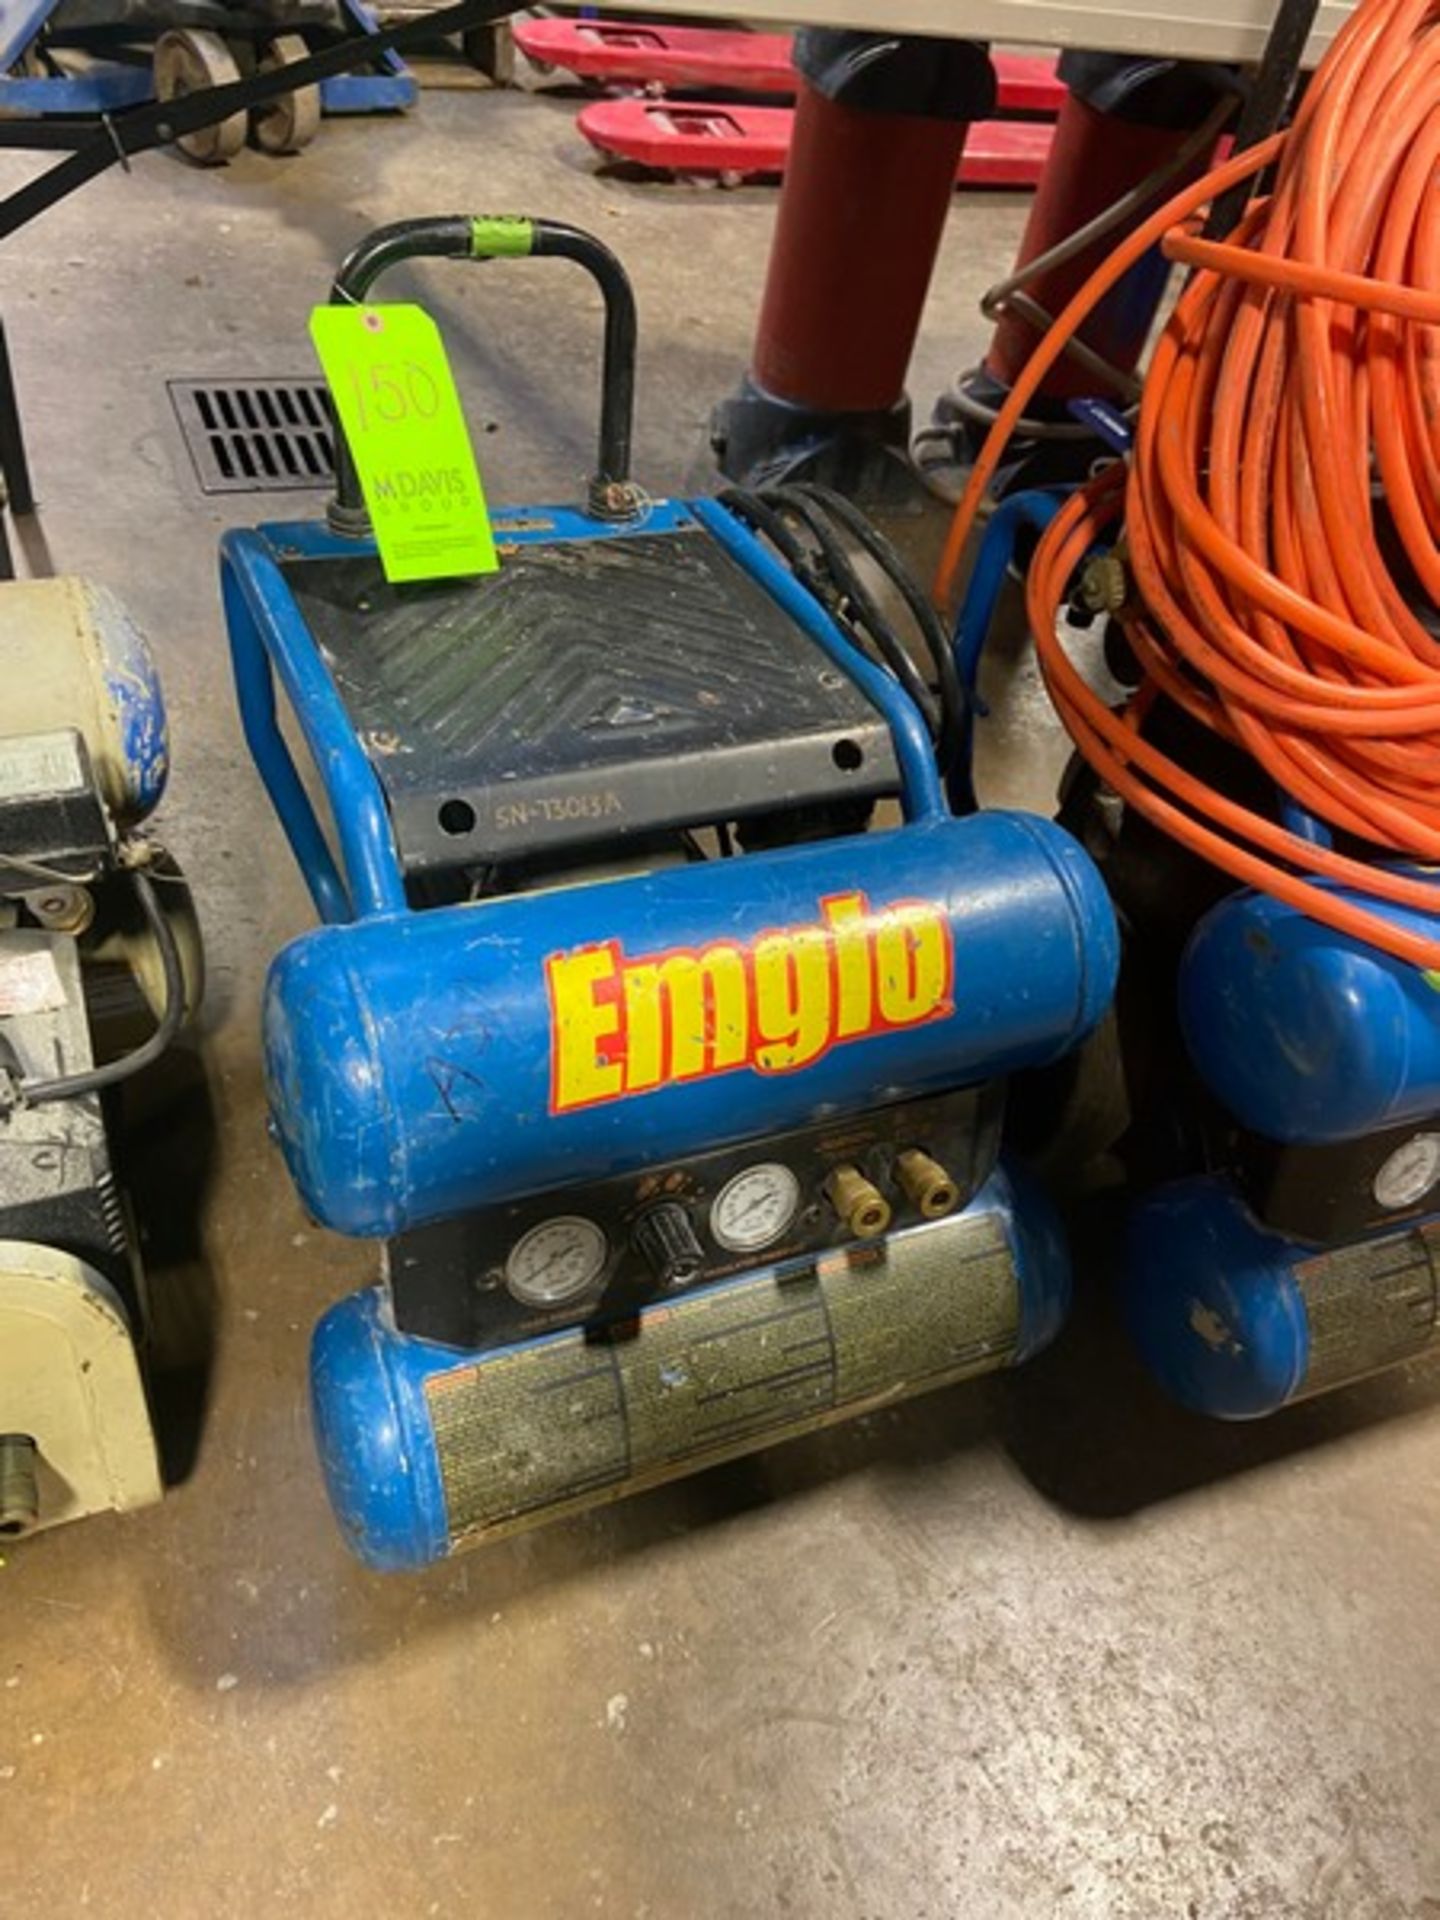 Emglo Portable Air Compressor, with S/S Diaphragm Pump, with Orange Hose, Mounted on Portable Wheels - Image 2 of 3